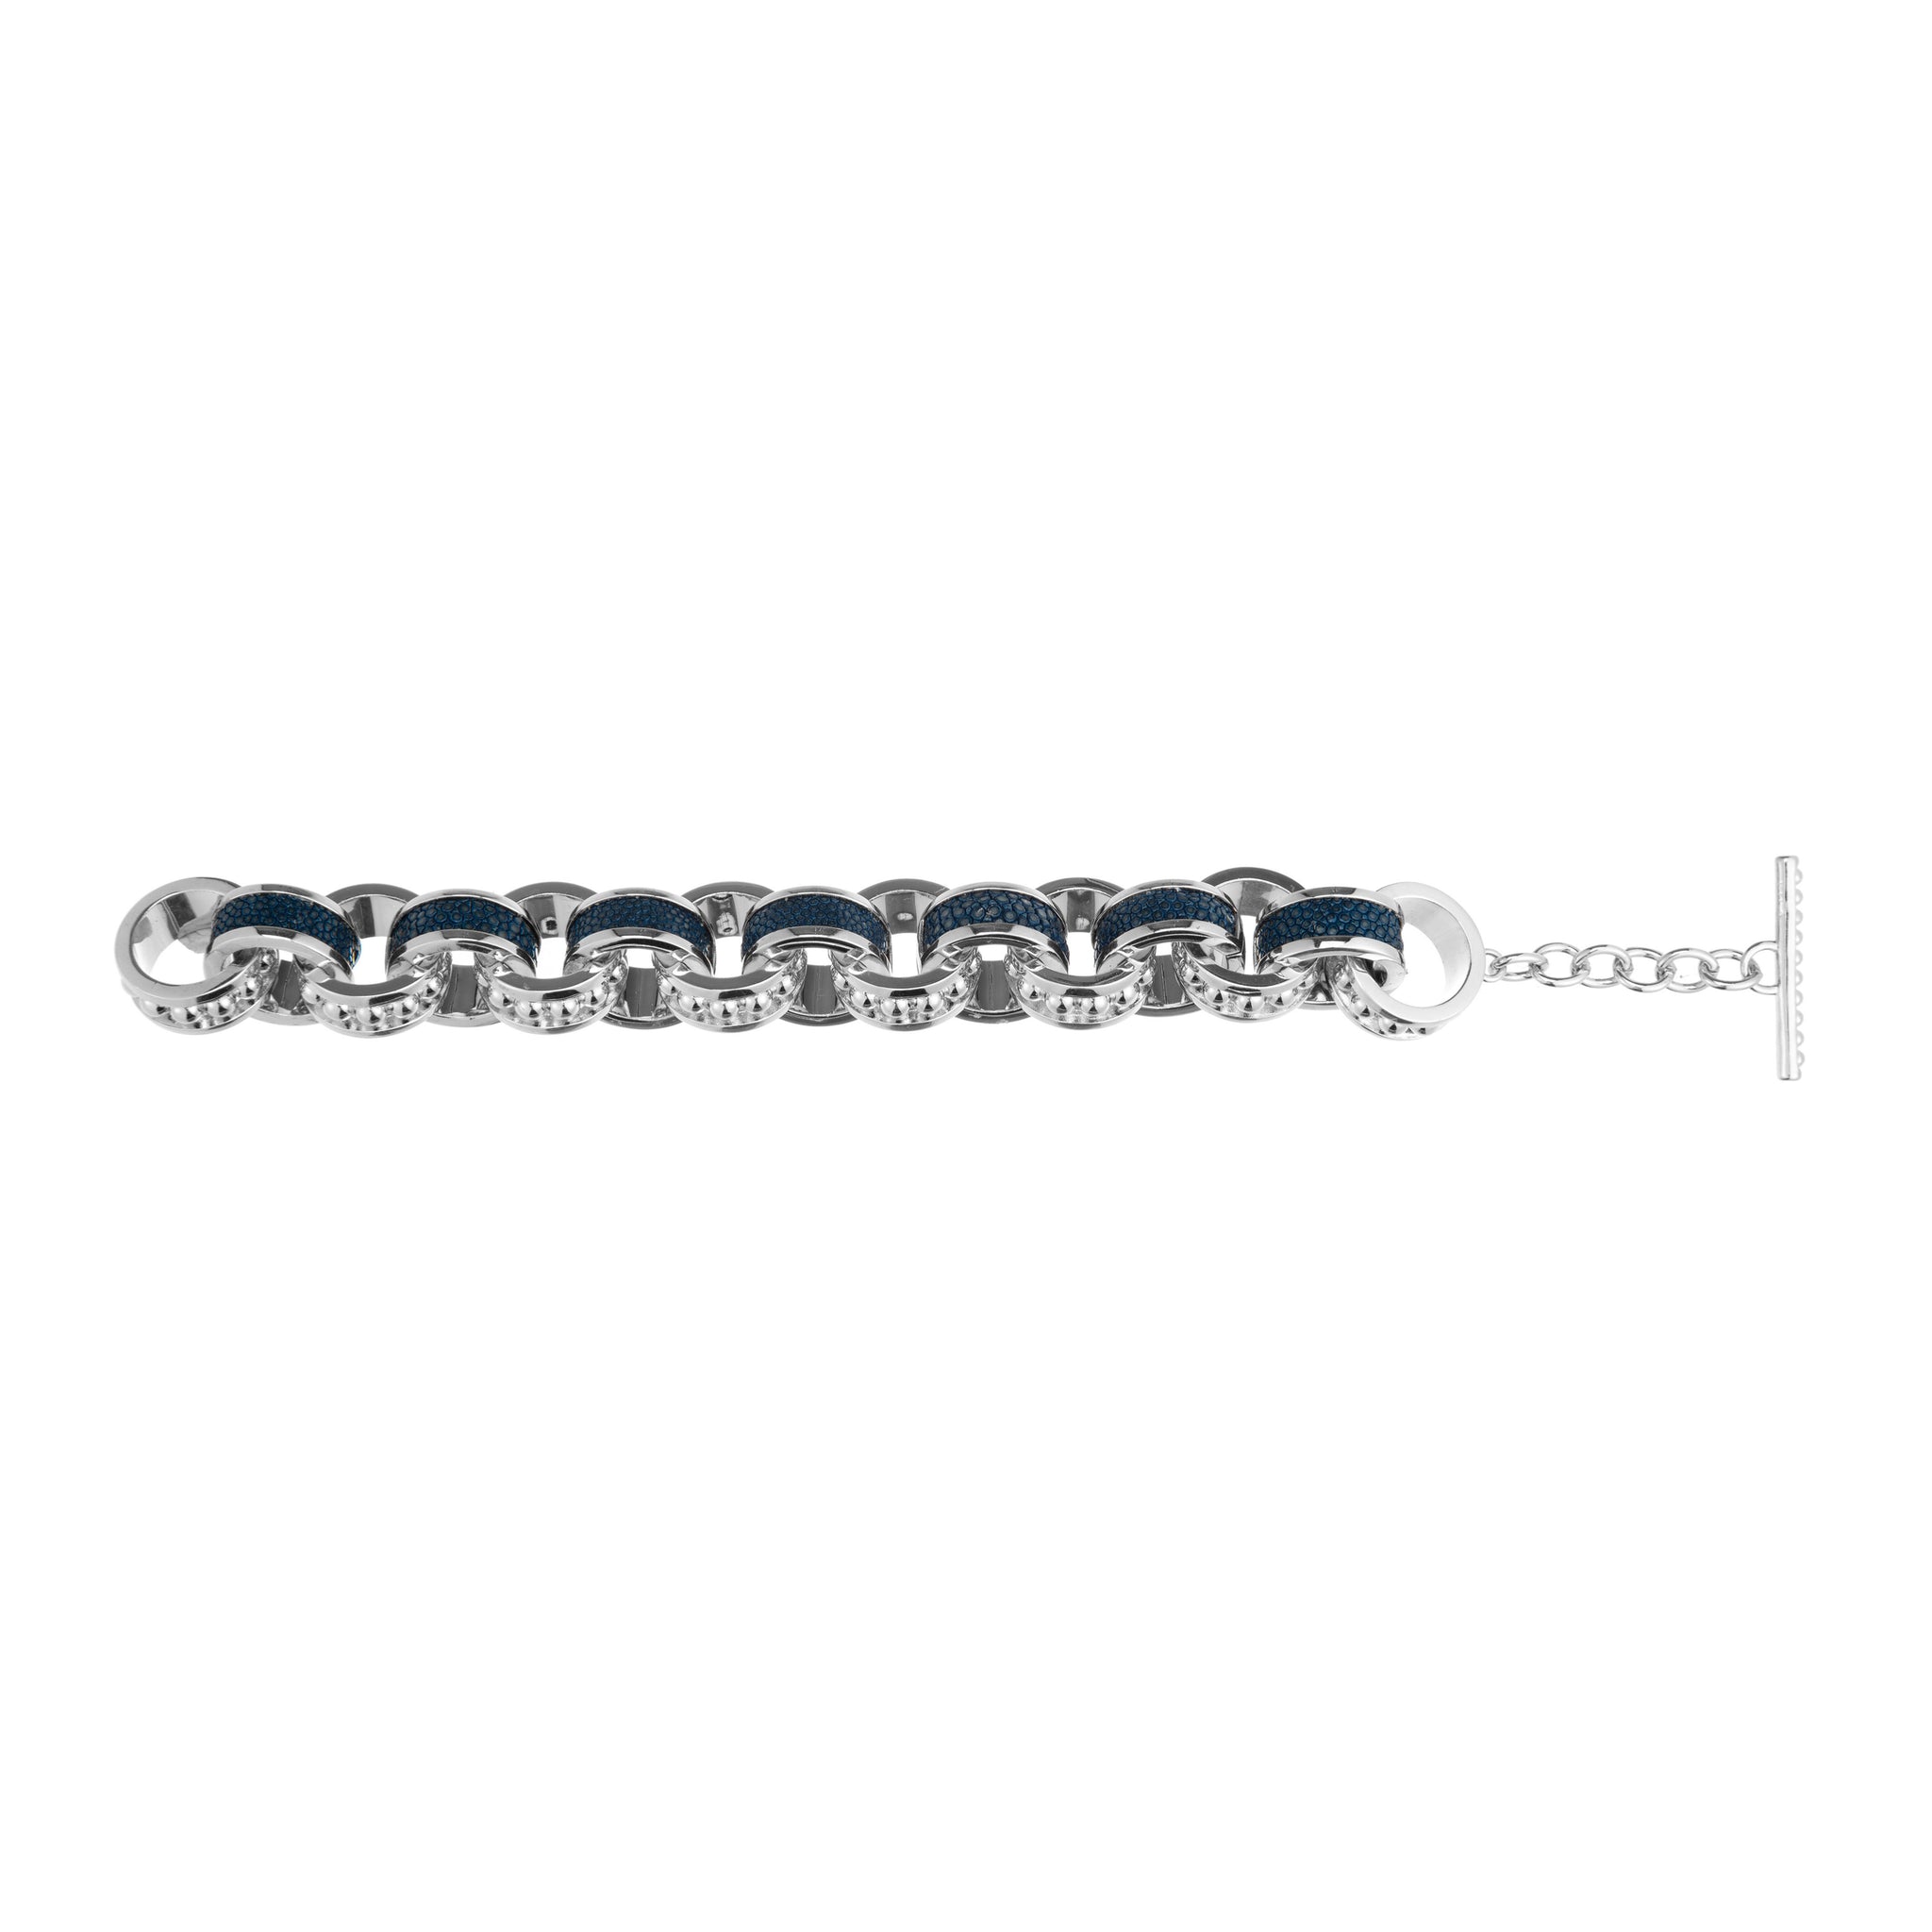 Lola Beaded White Gold Link Bracelet With Shagreen Inlay